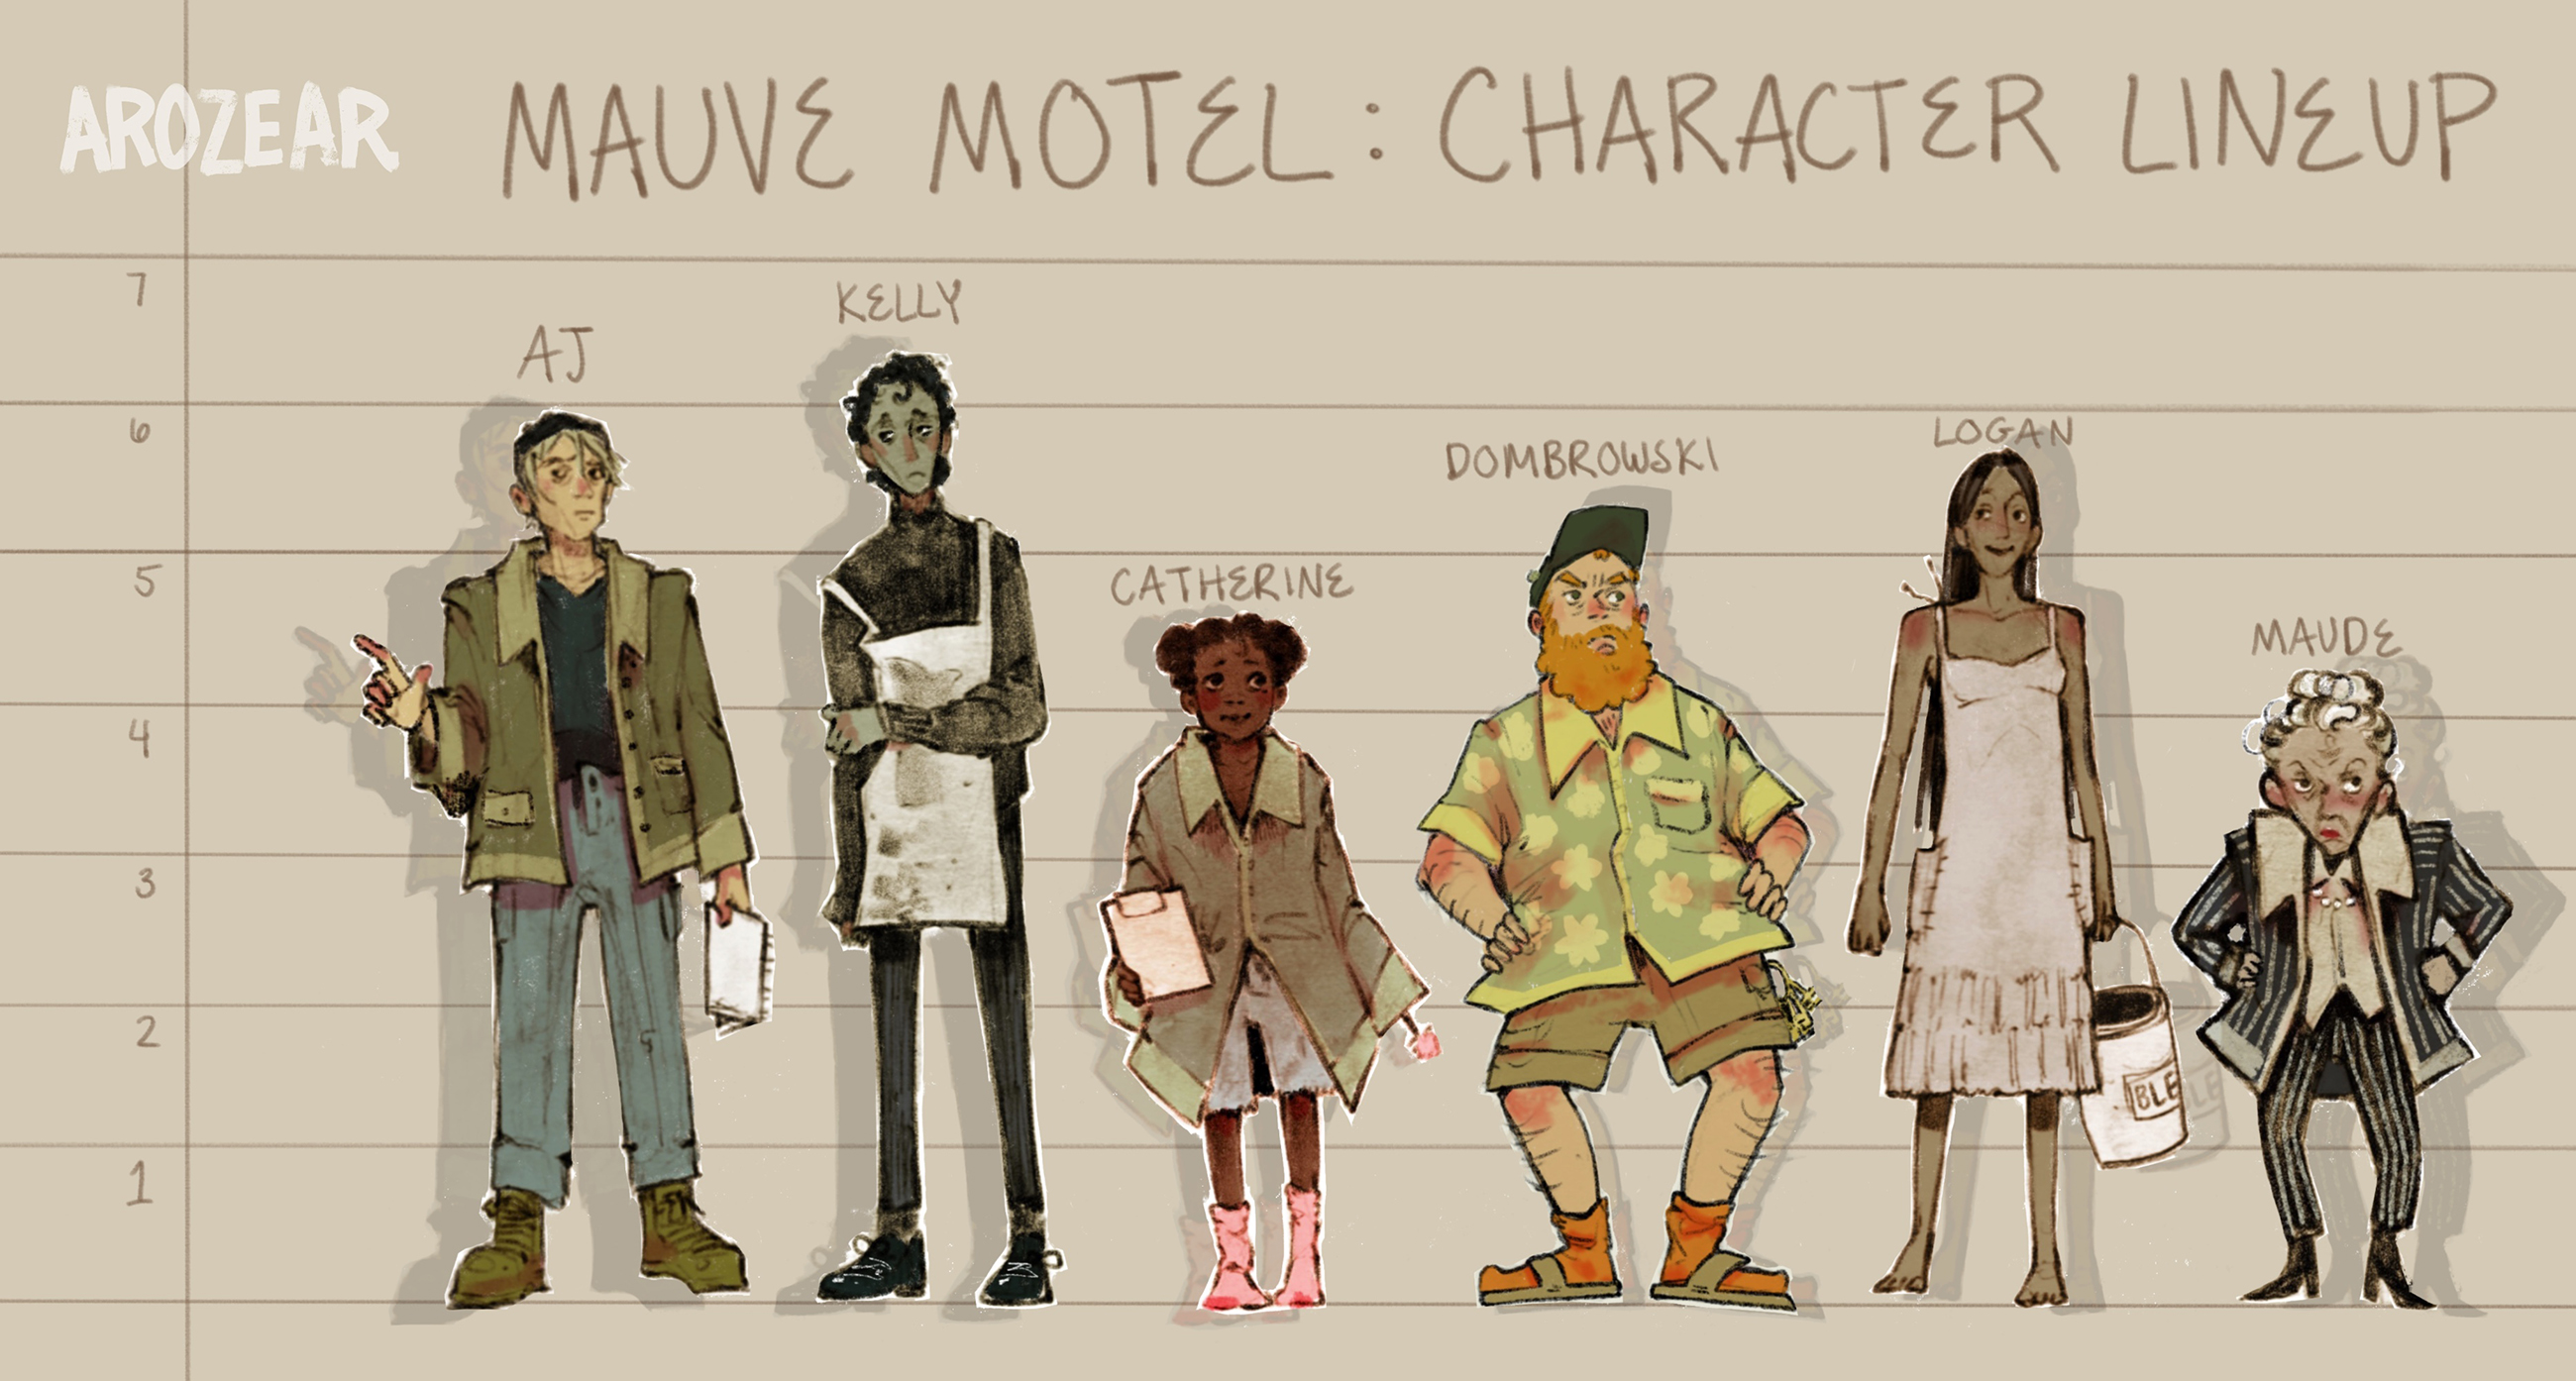 character lineup by Mia Rozear